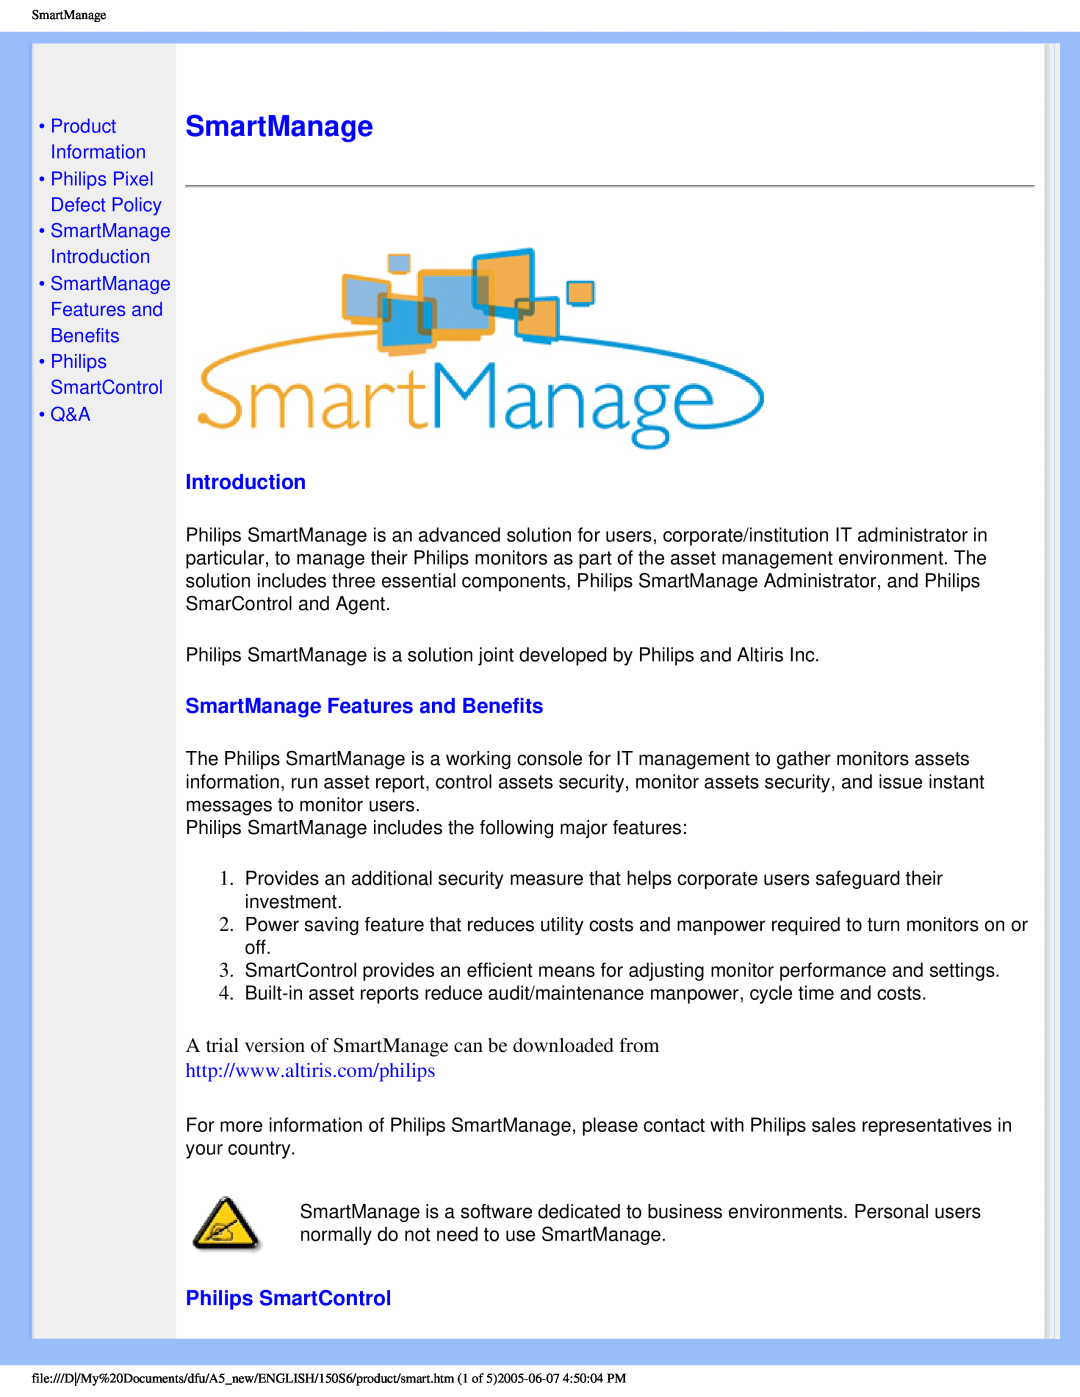 Philips 15056 user manual SmartManage Features and Benefits, Philips SmartControl, SmartManage Introduction 